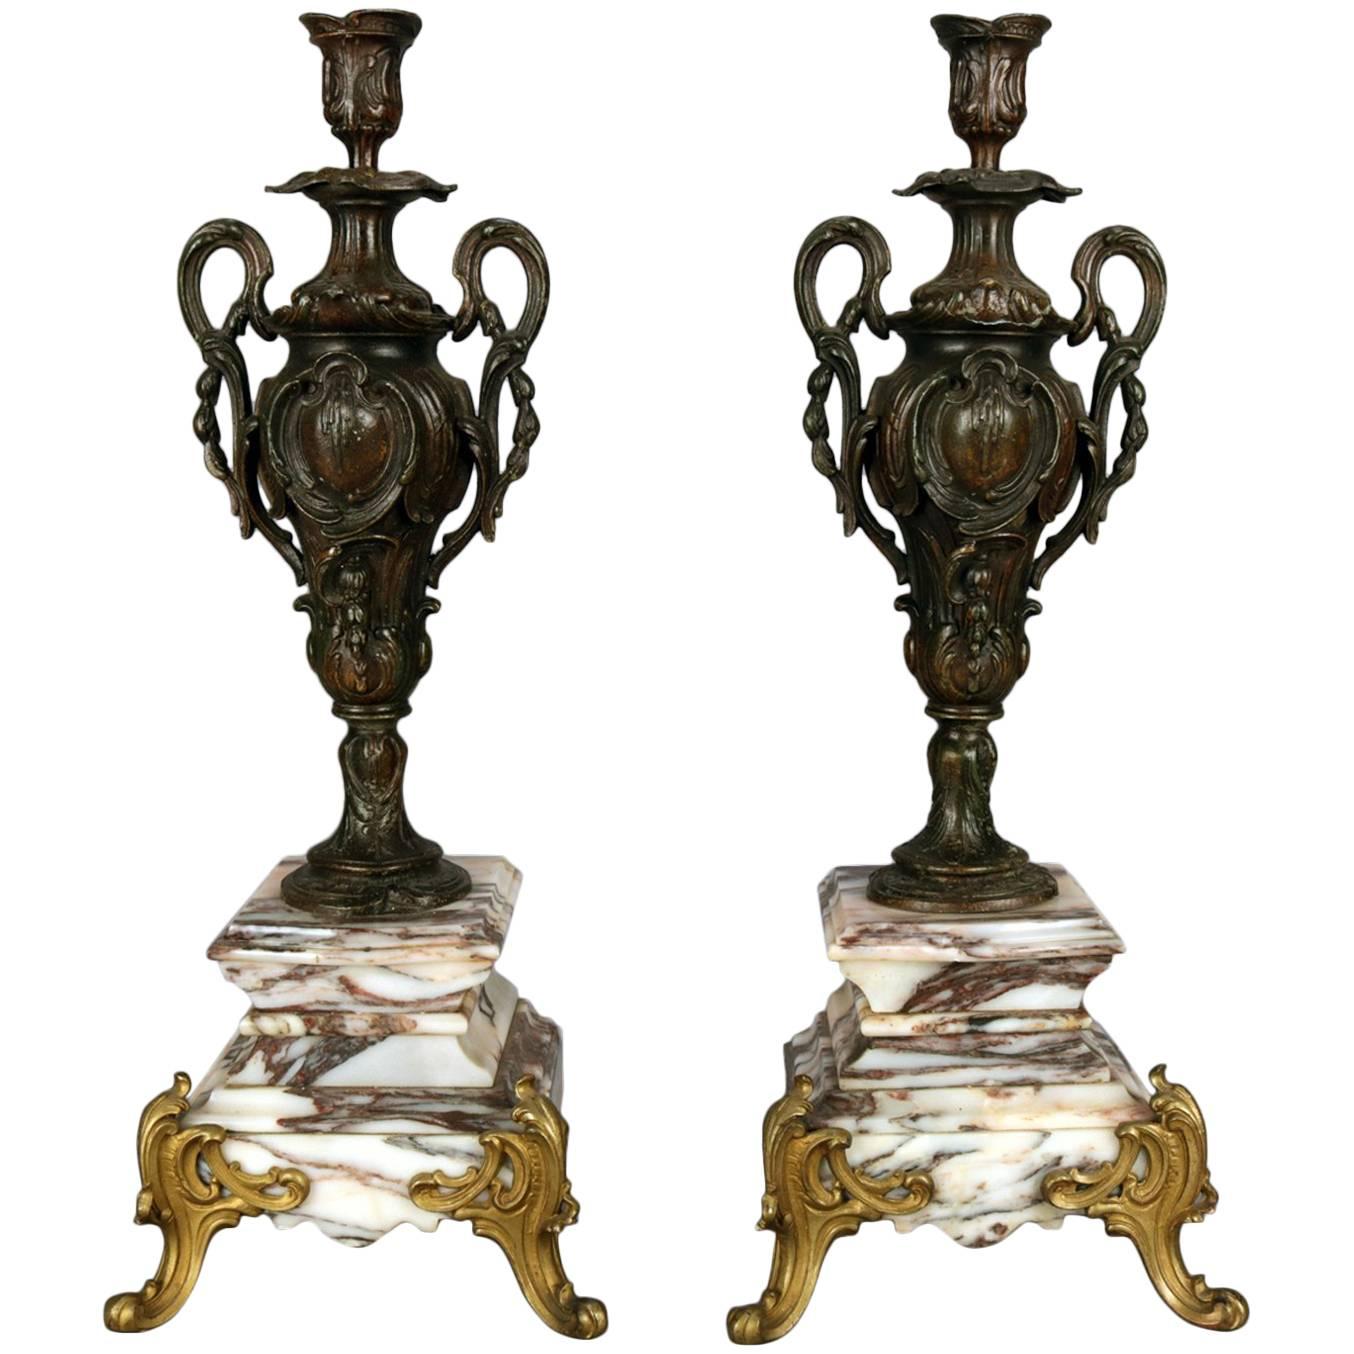 Pair of Classical Parcel-Gilt and Bronzed Urn Form Candlesticks on Marble Base